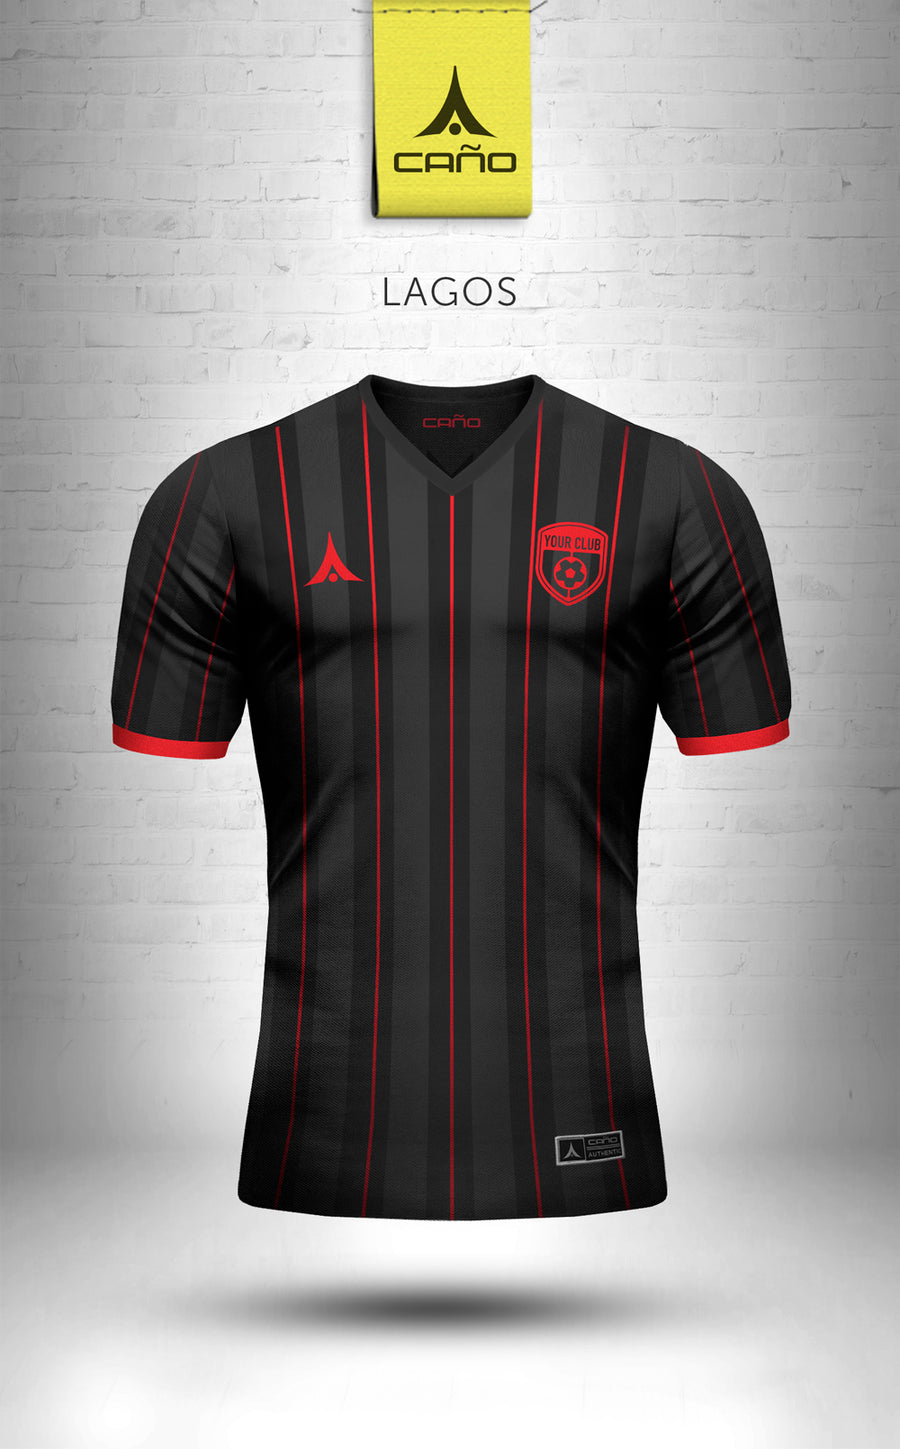 Lagos in black/red